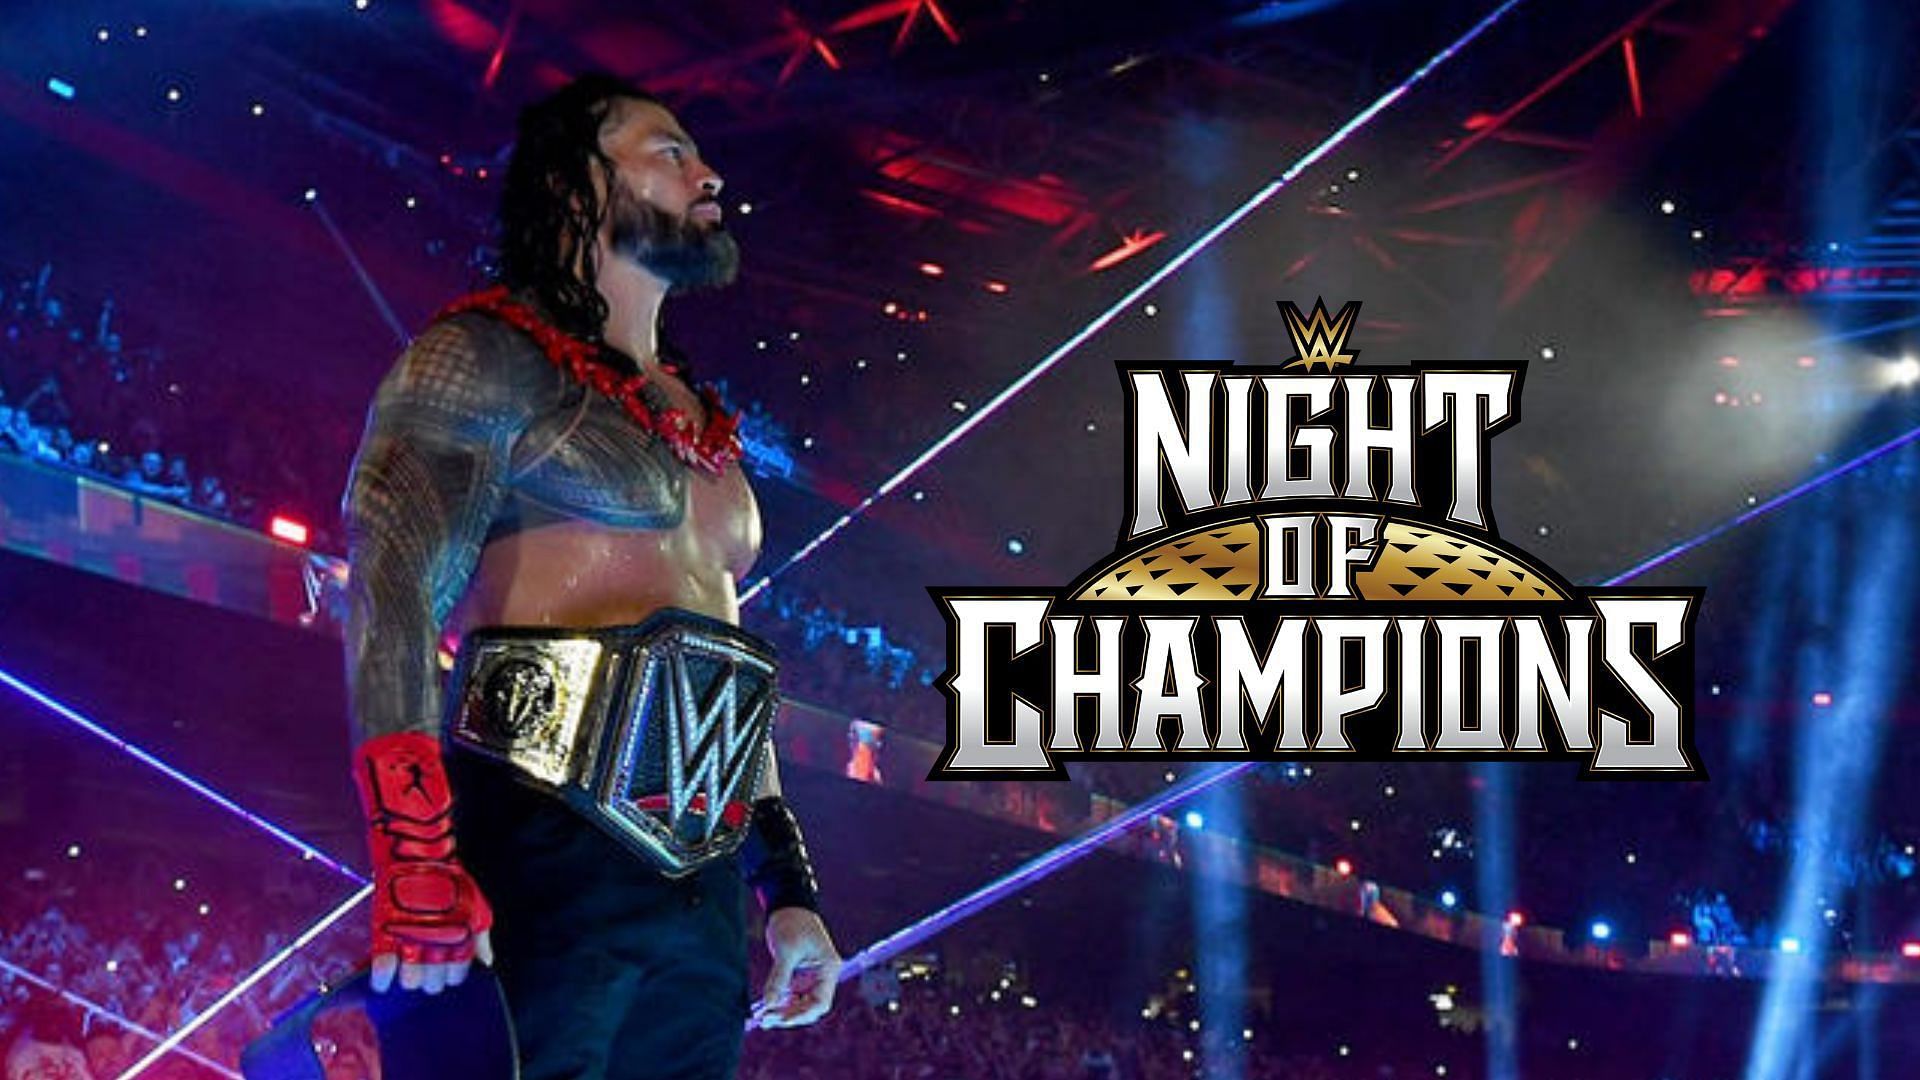 Roman Reigns has a score to settle with his former friend-turned-rival.